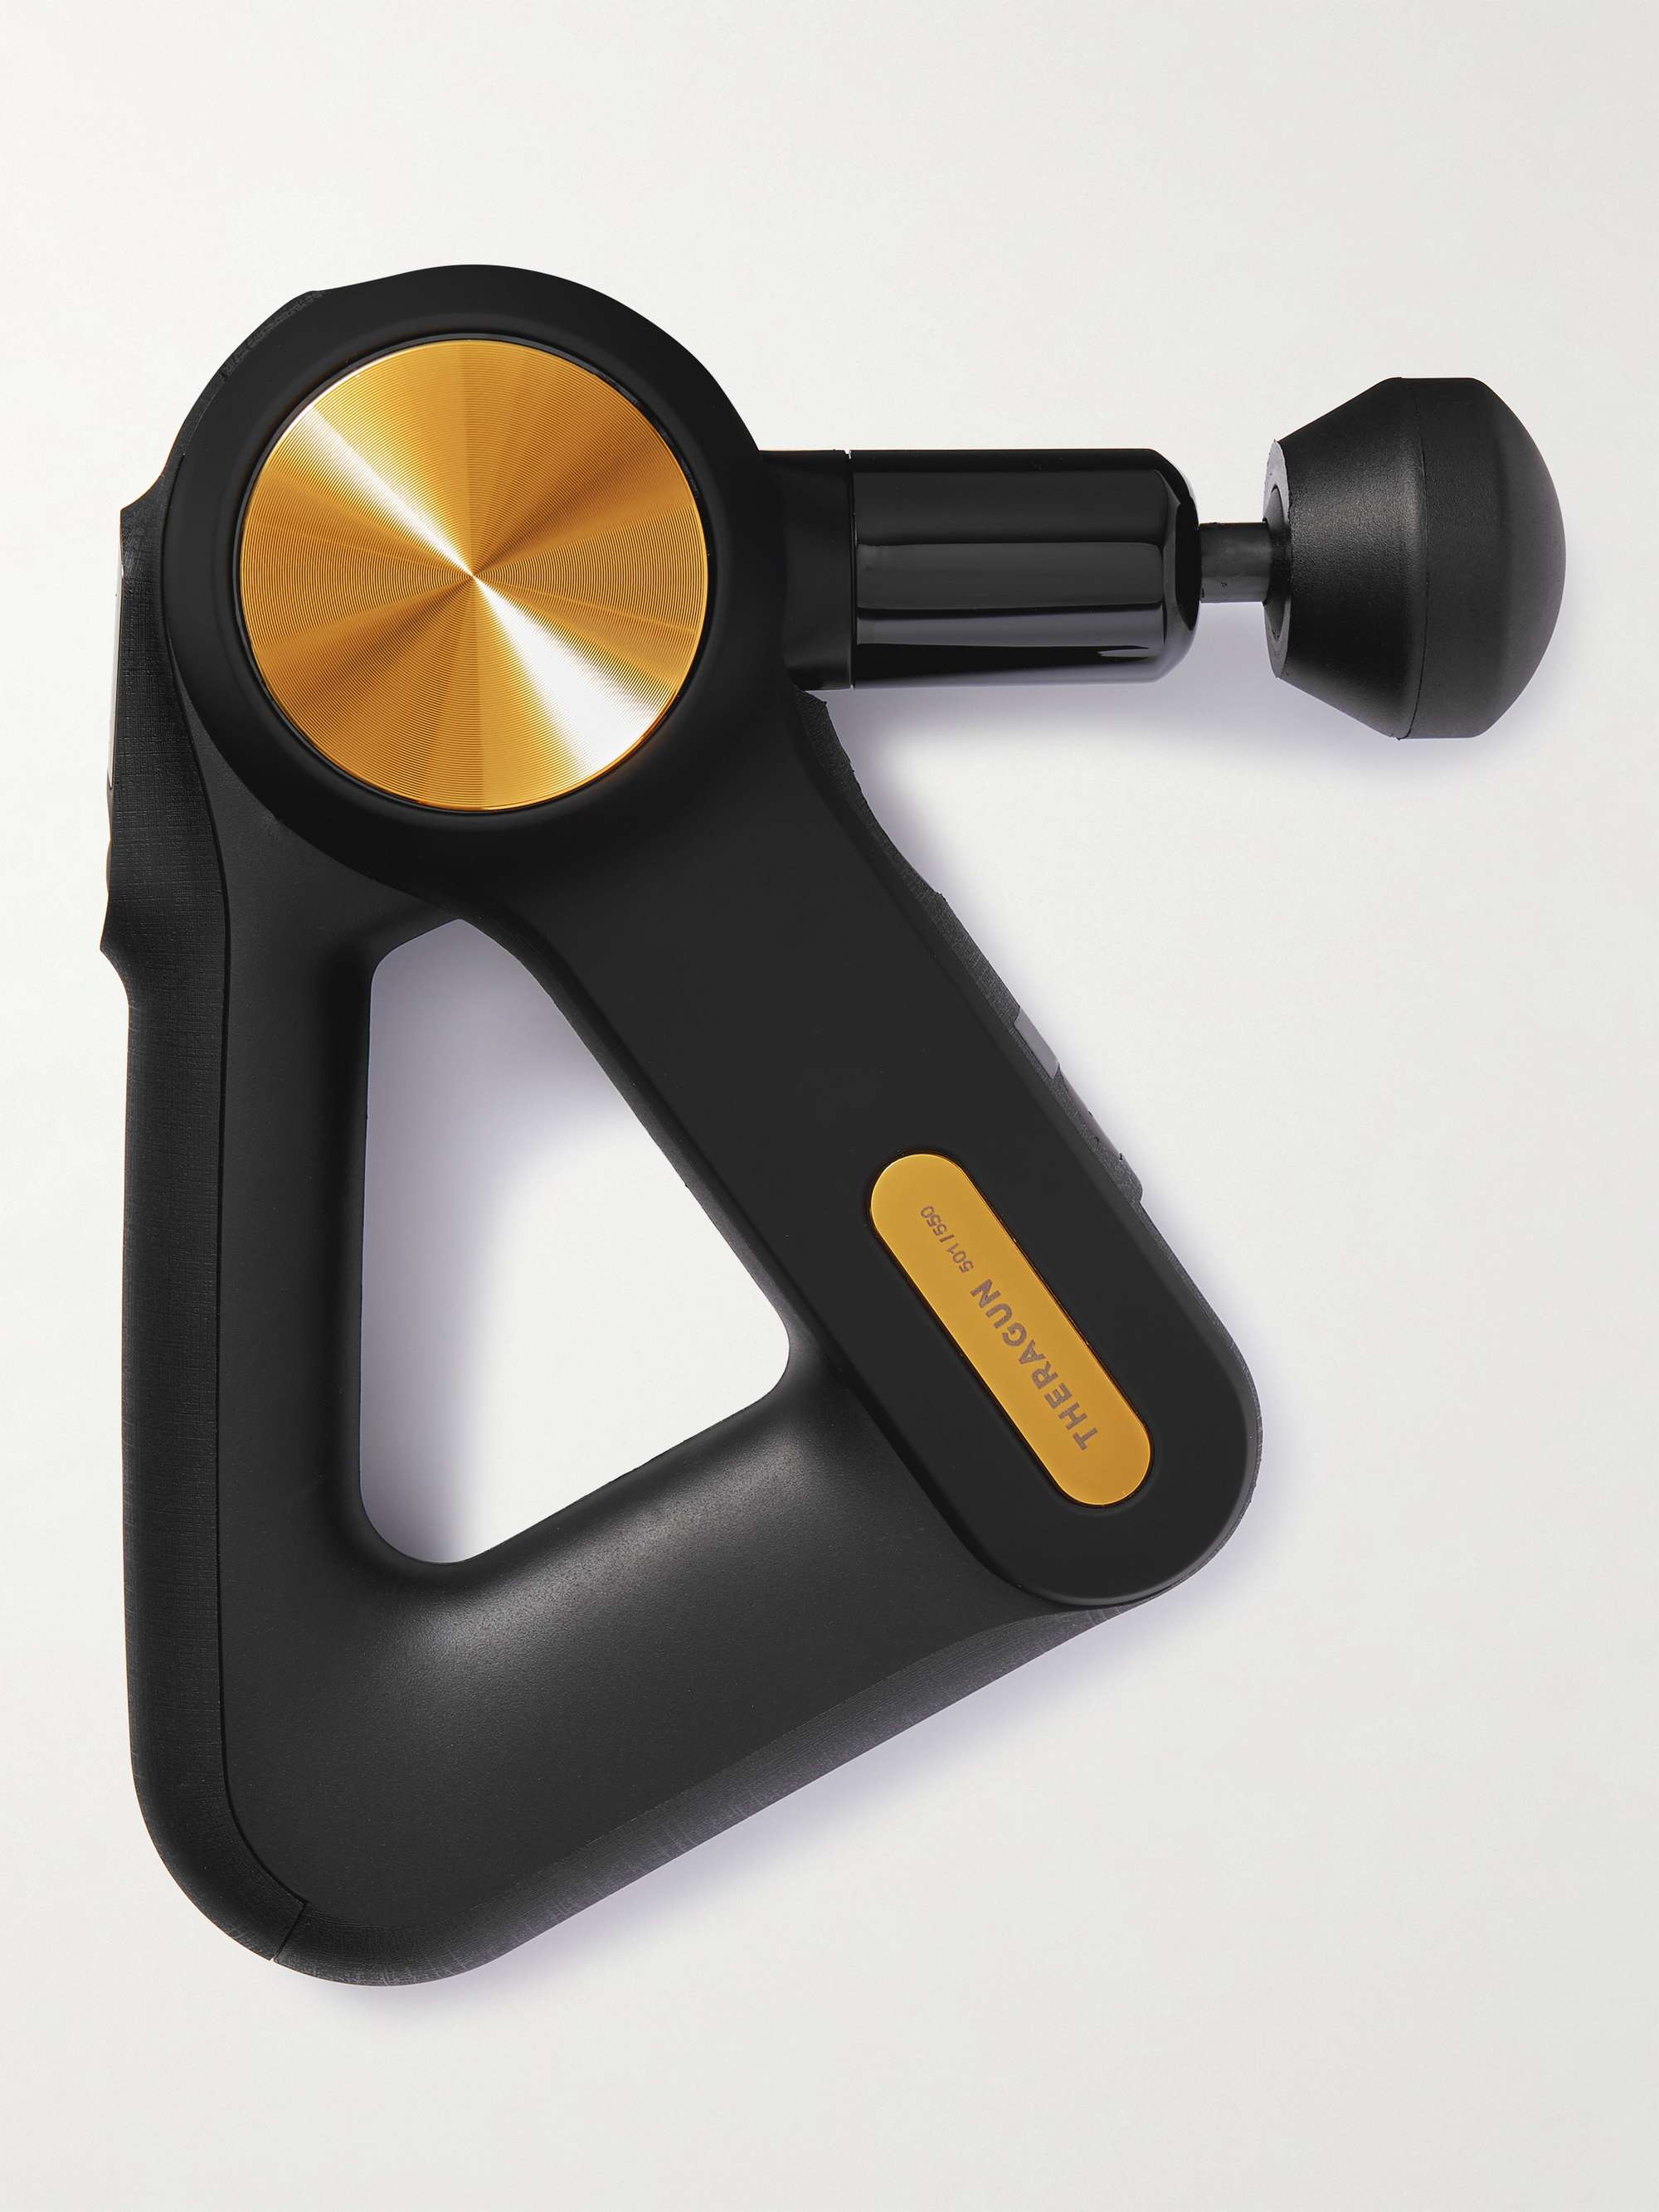 THERABODY Theragun PRO Limited Edition Gold-Plated Massager